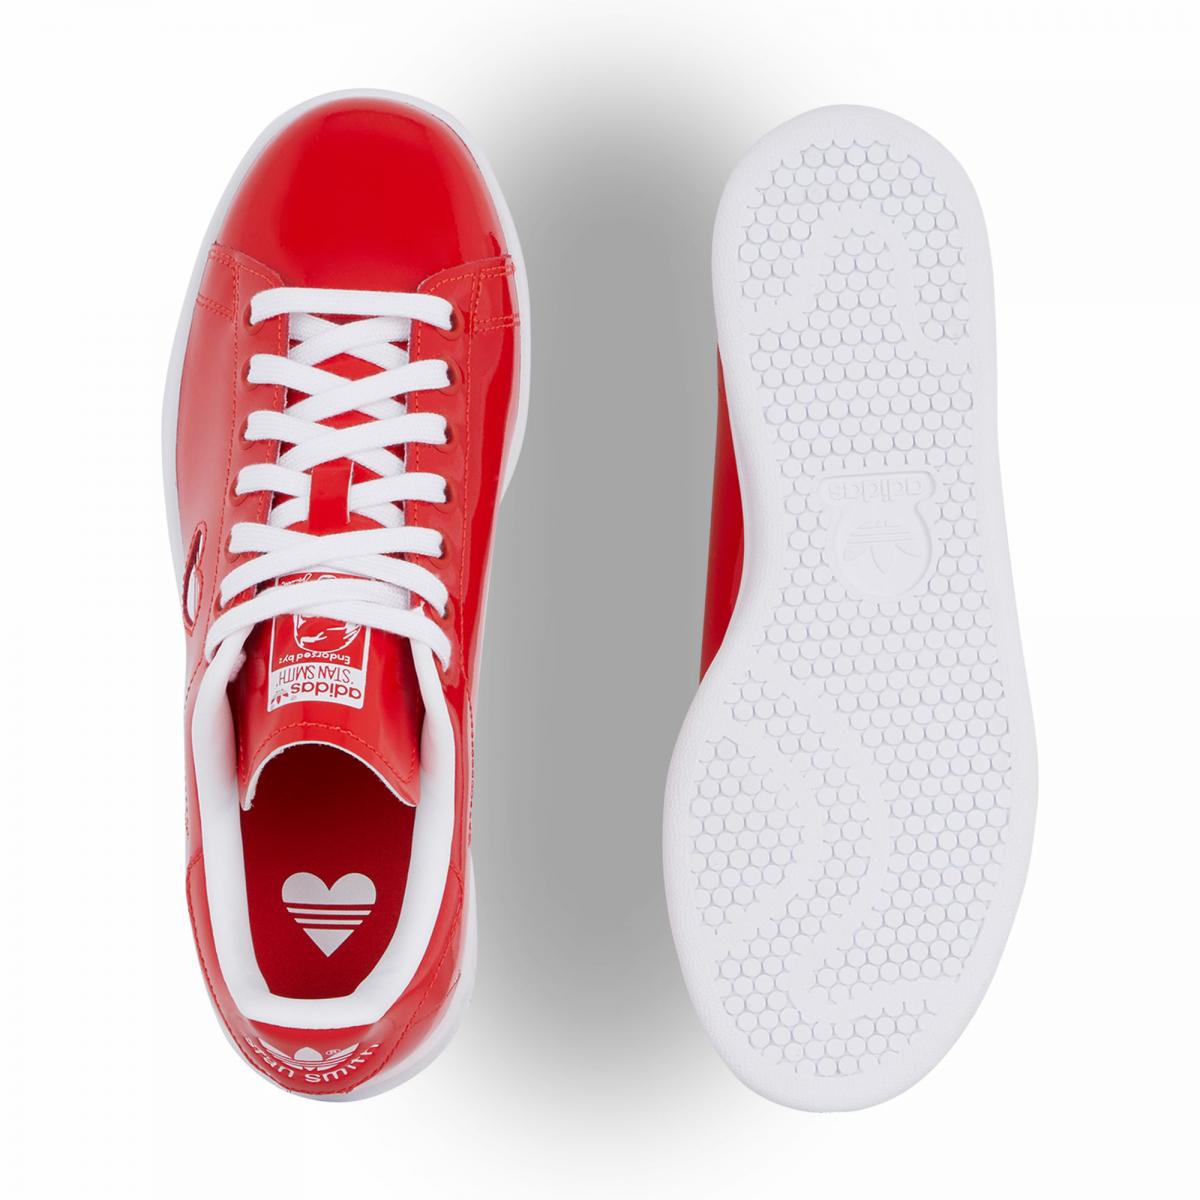 adidas stan smith femme rouge vernis